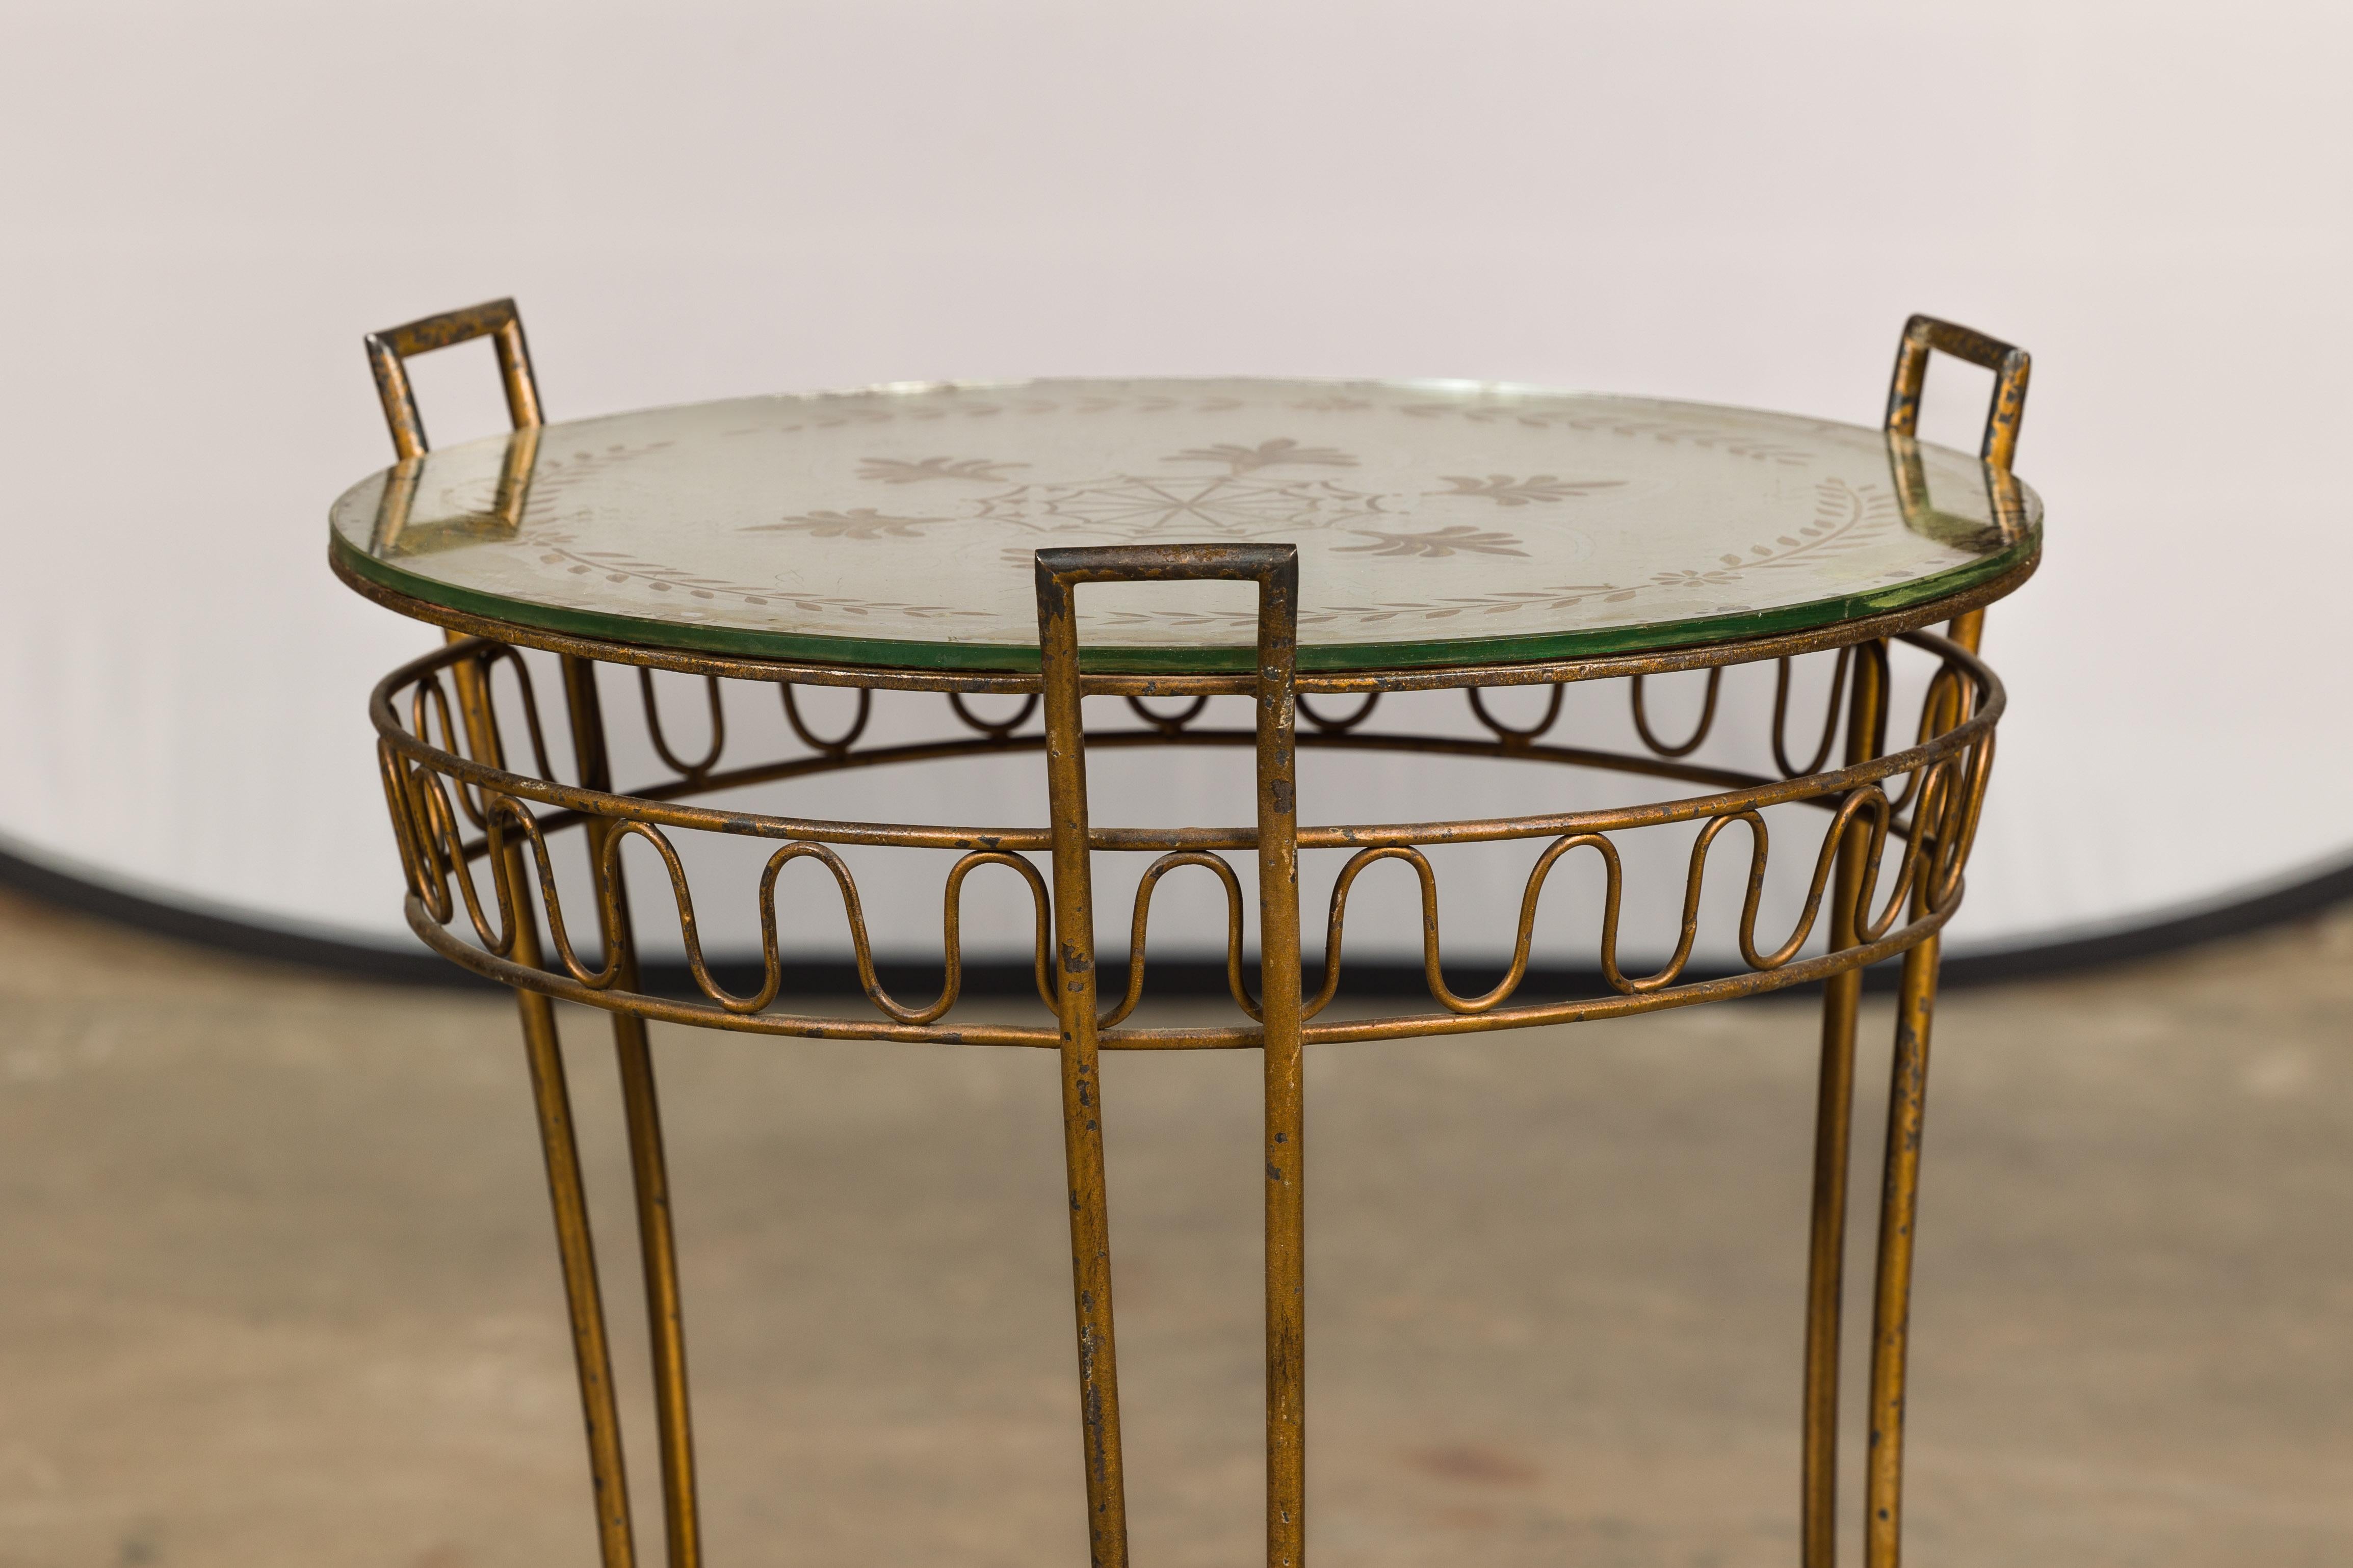 French 1920s Gilt Iron Side Table with Etched Foliage Mirrored Top and Low Shelf For Sale 3